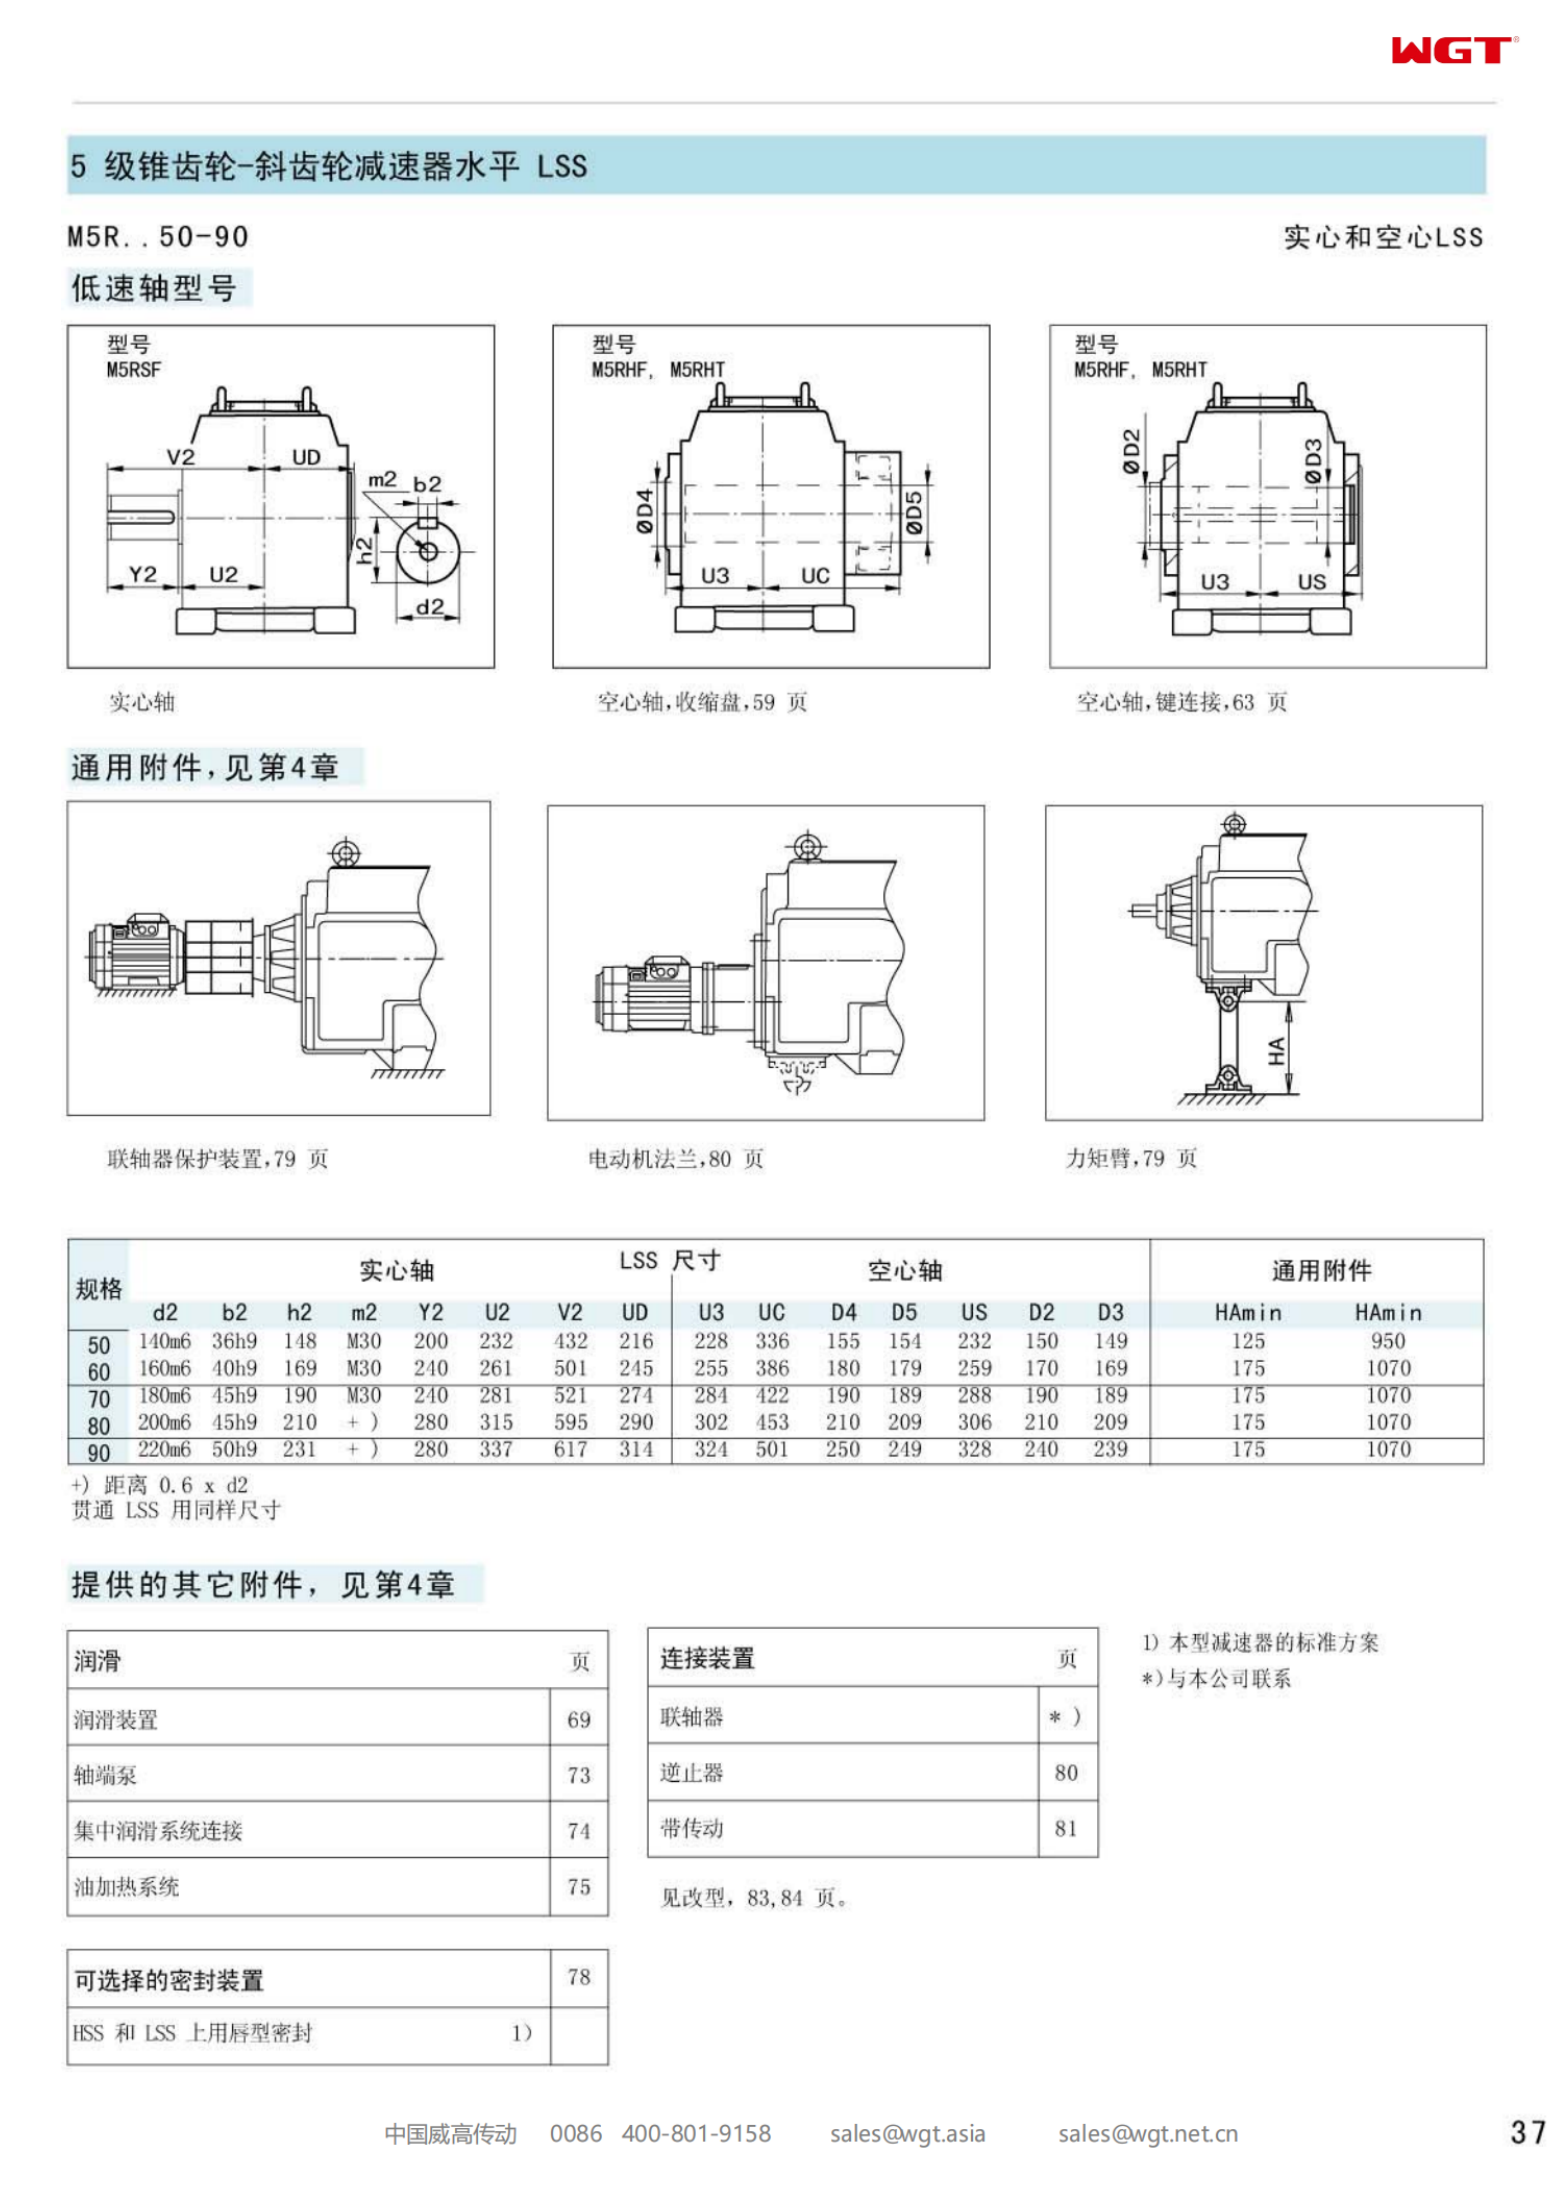 M5RHF90 Replace_SEW_M_Series Gearbox